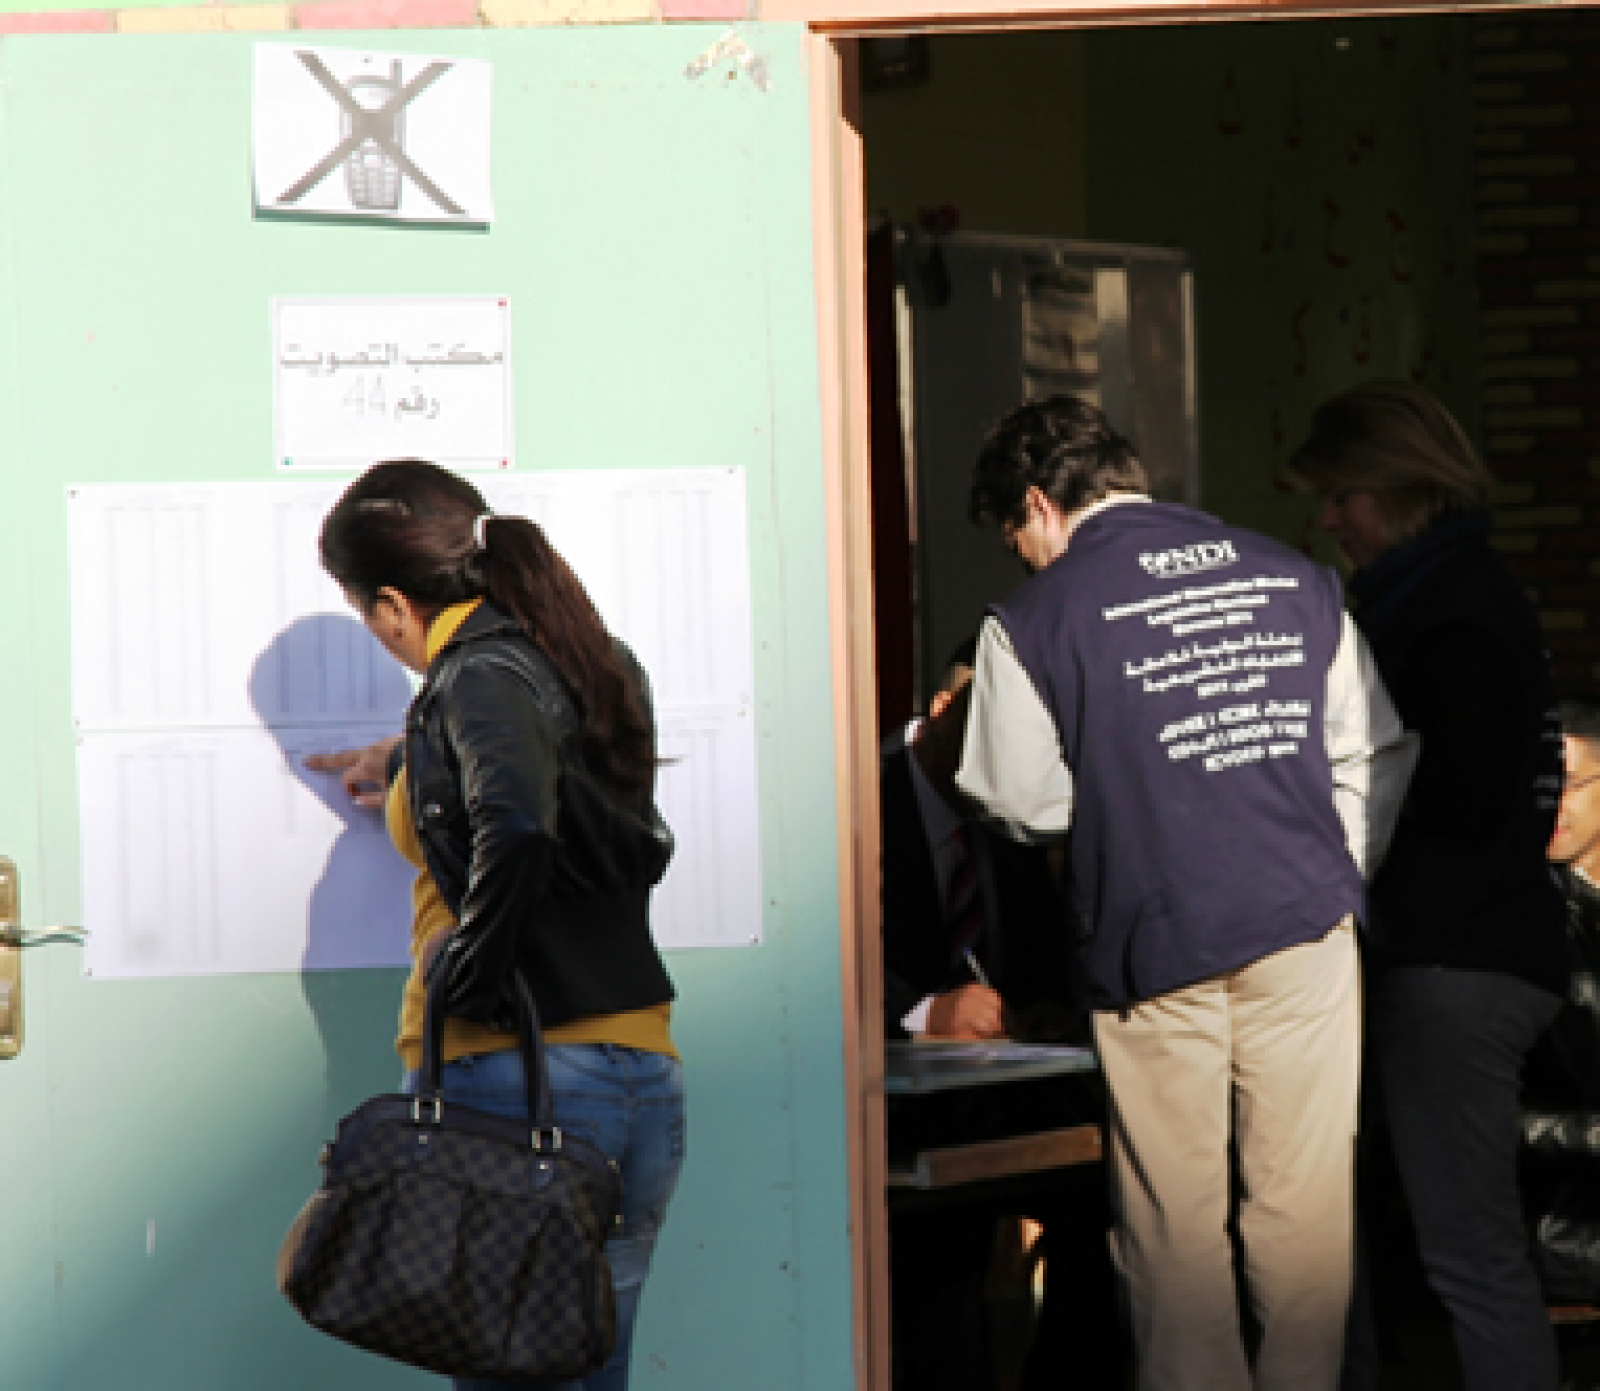 Though Transparent, Morocco's Parliamentary Elections Show Citizen Interest in Further and Deeper Reform